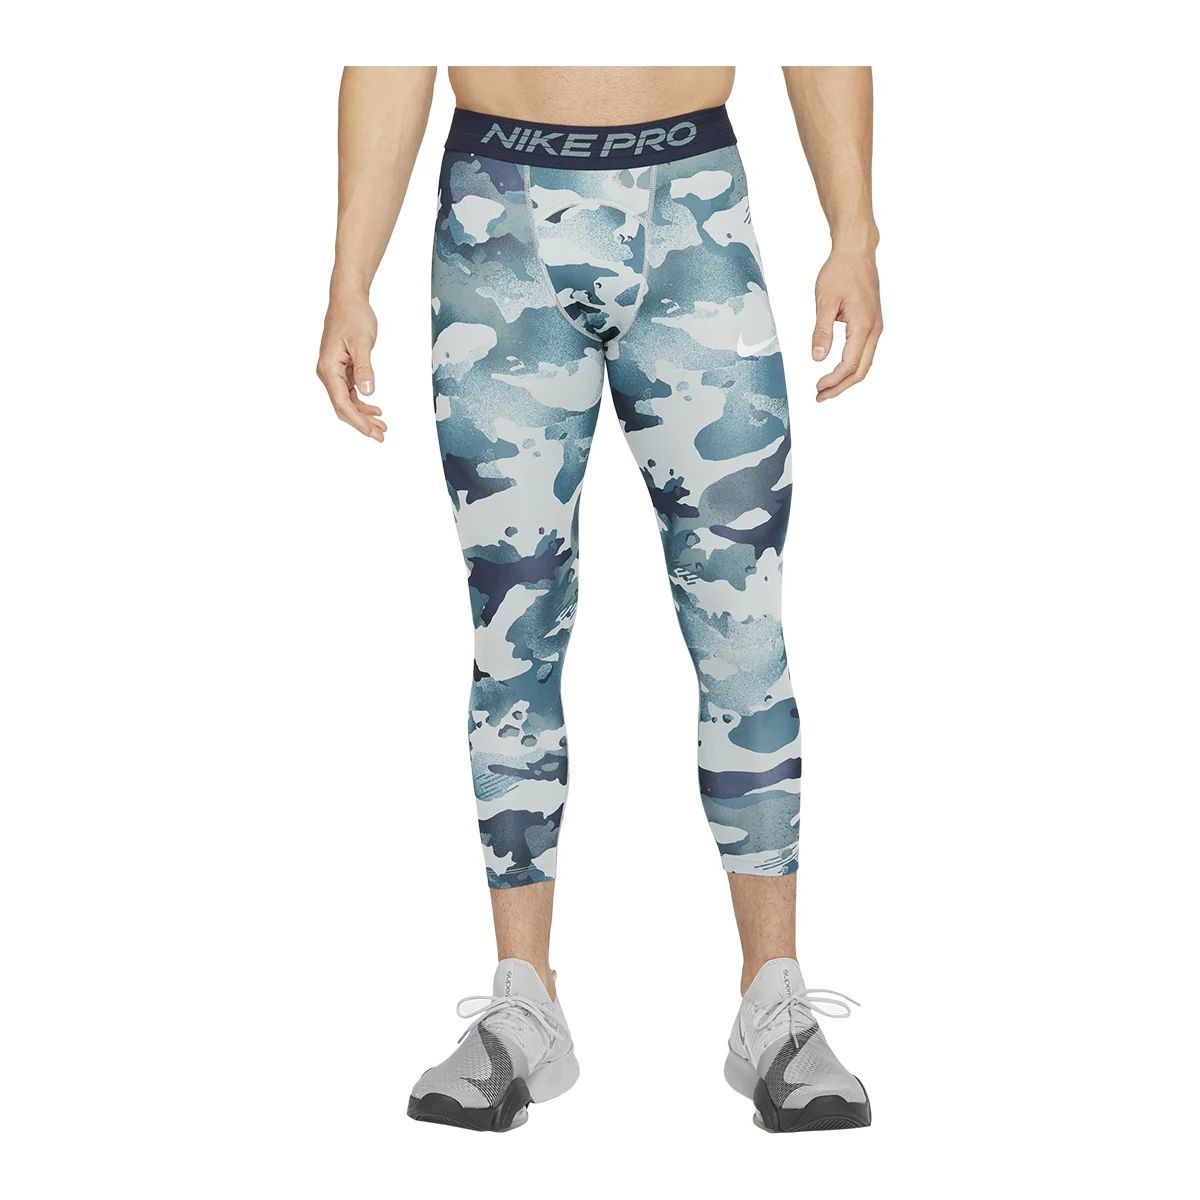 rukken Ingang huurder Nike Pro Men's All Over Print Camo 3/4 Tights | Southcentre Mall